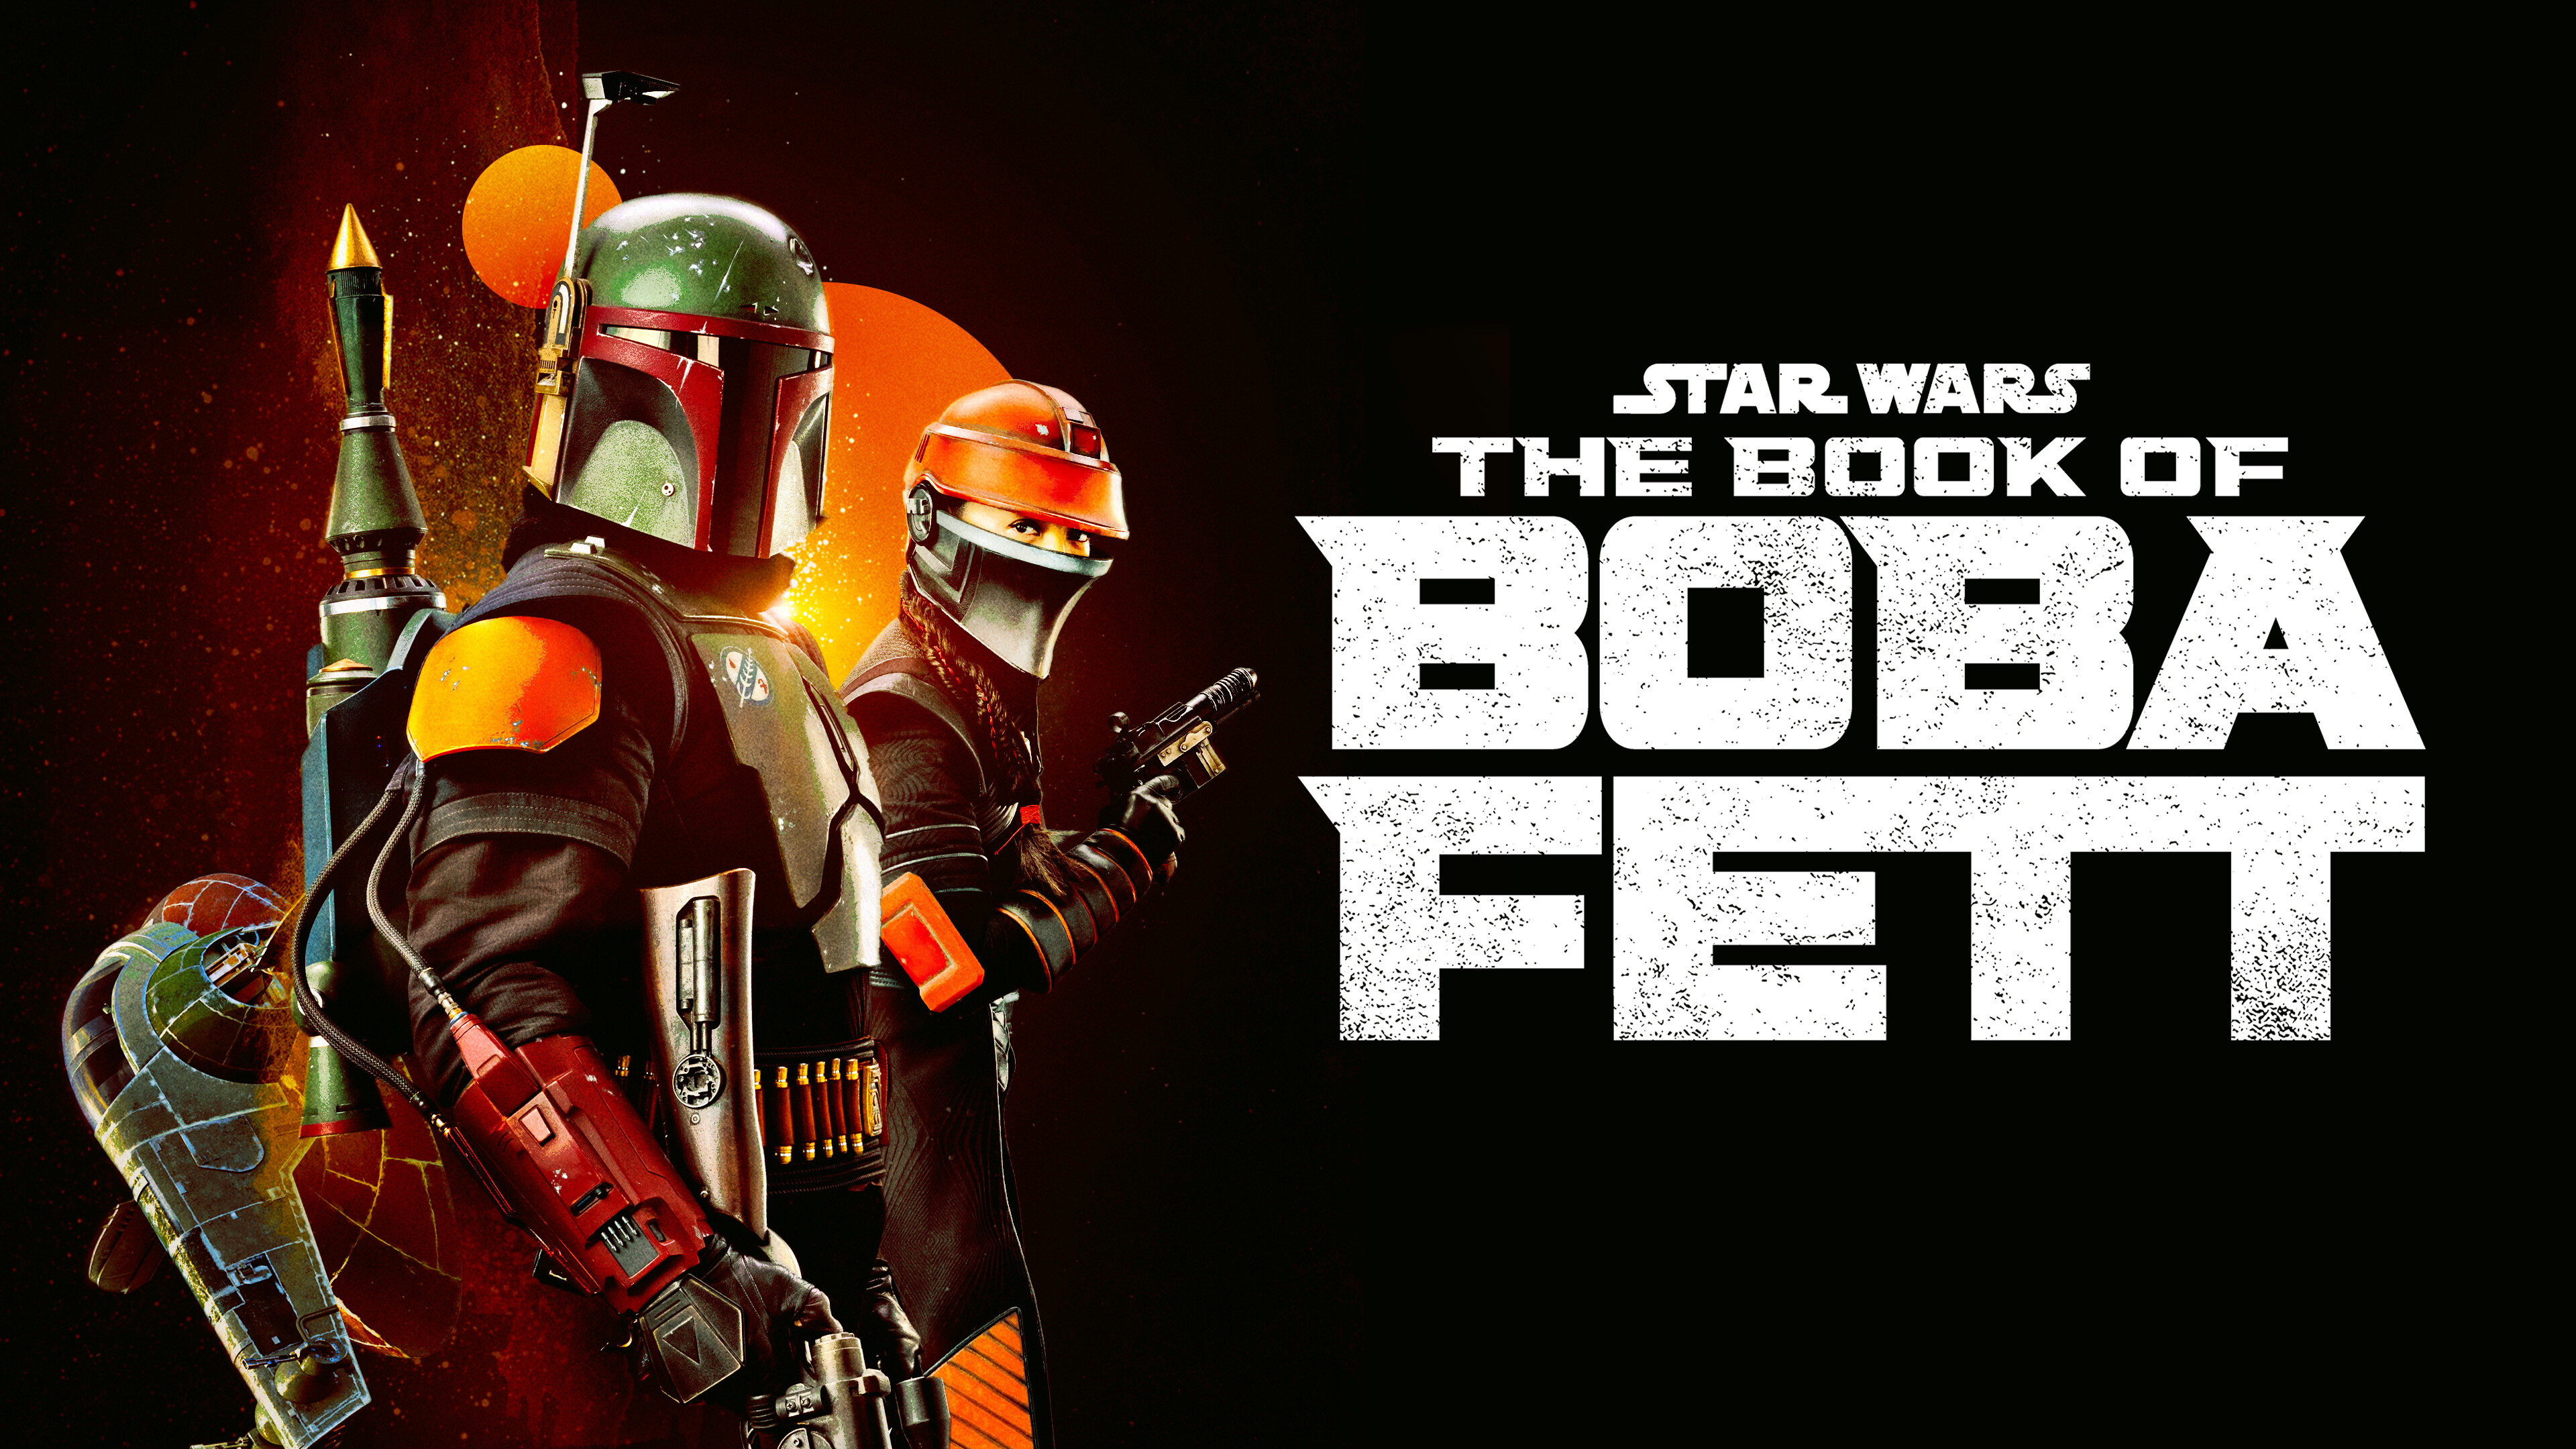 The Book of Boba Fett: TV series, A part of the Star Wars franchise, Ming-Na Wen, Fennec Shand. 3840x2160 4K Wallpaper.